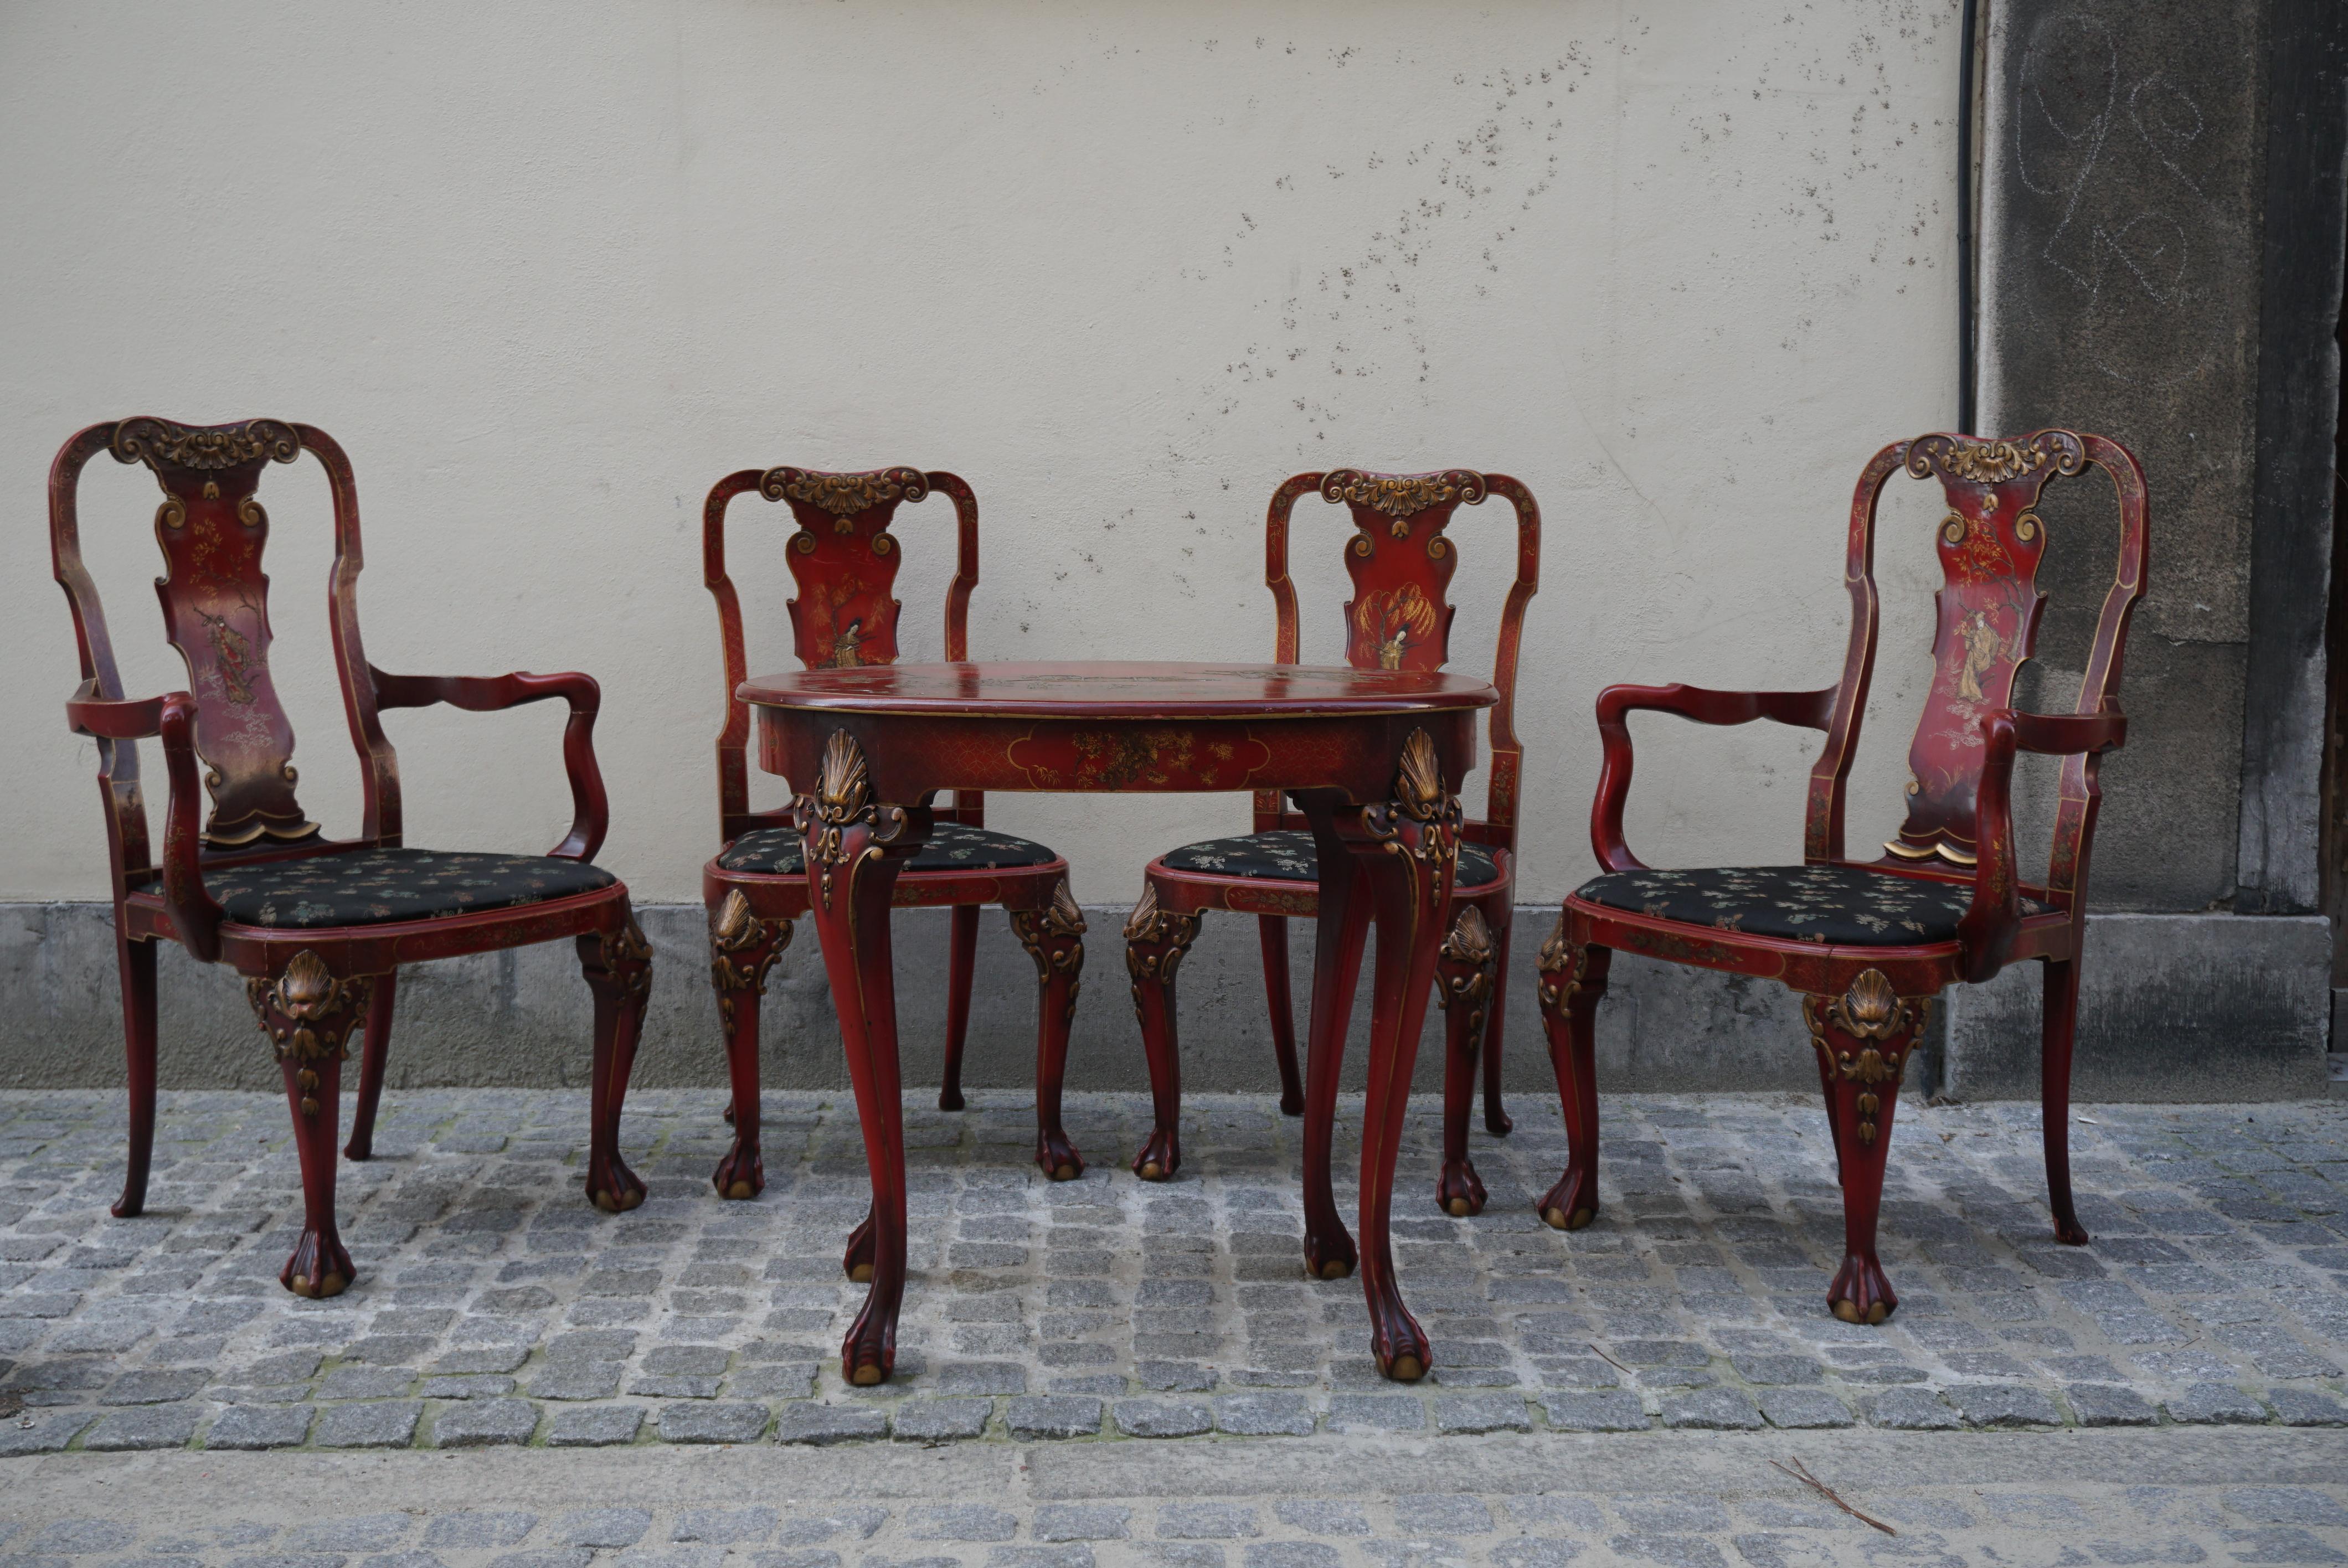 Red lacquered Chinese Chippendale oval table with four chairs.

Chinoiserie is the European interpretation and imitation of Chinese and other East Asian artistic traditions, especially in the decorative arts, garden design, architecture, literature,